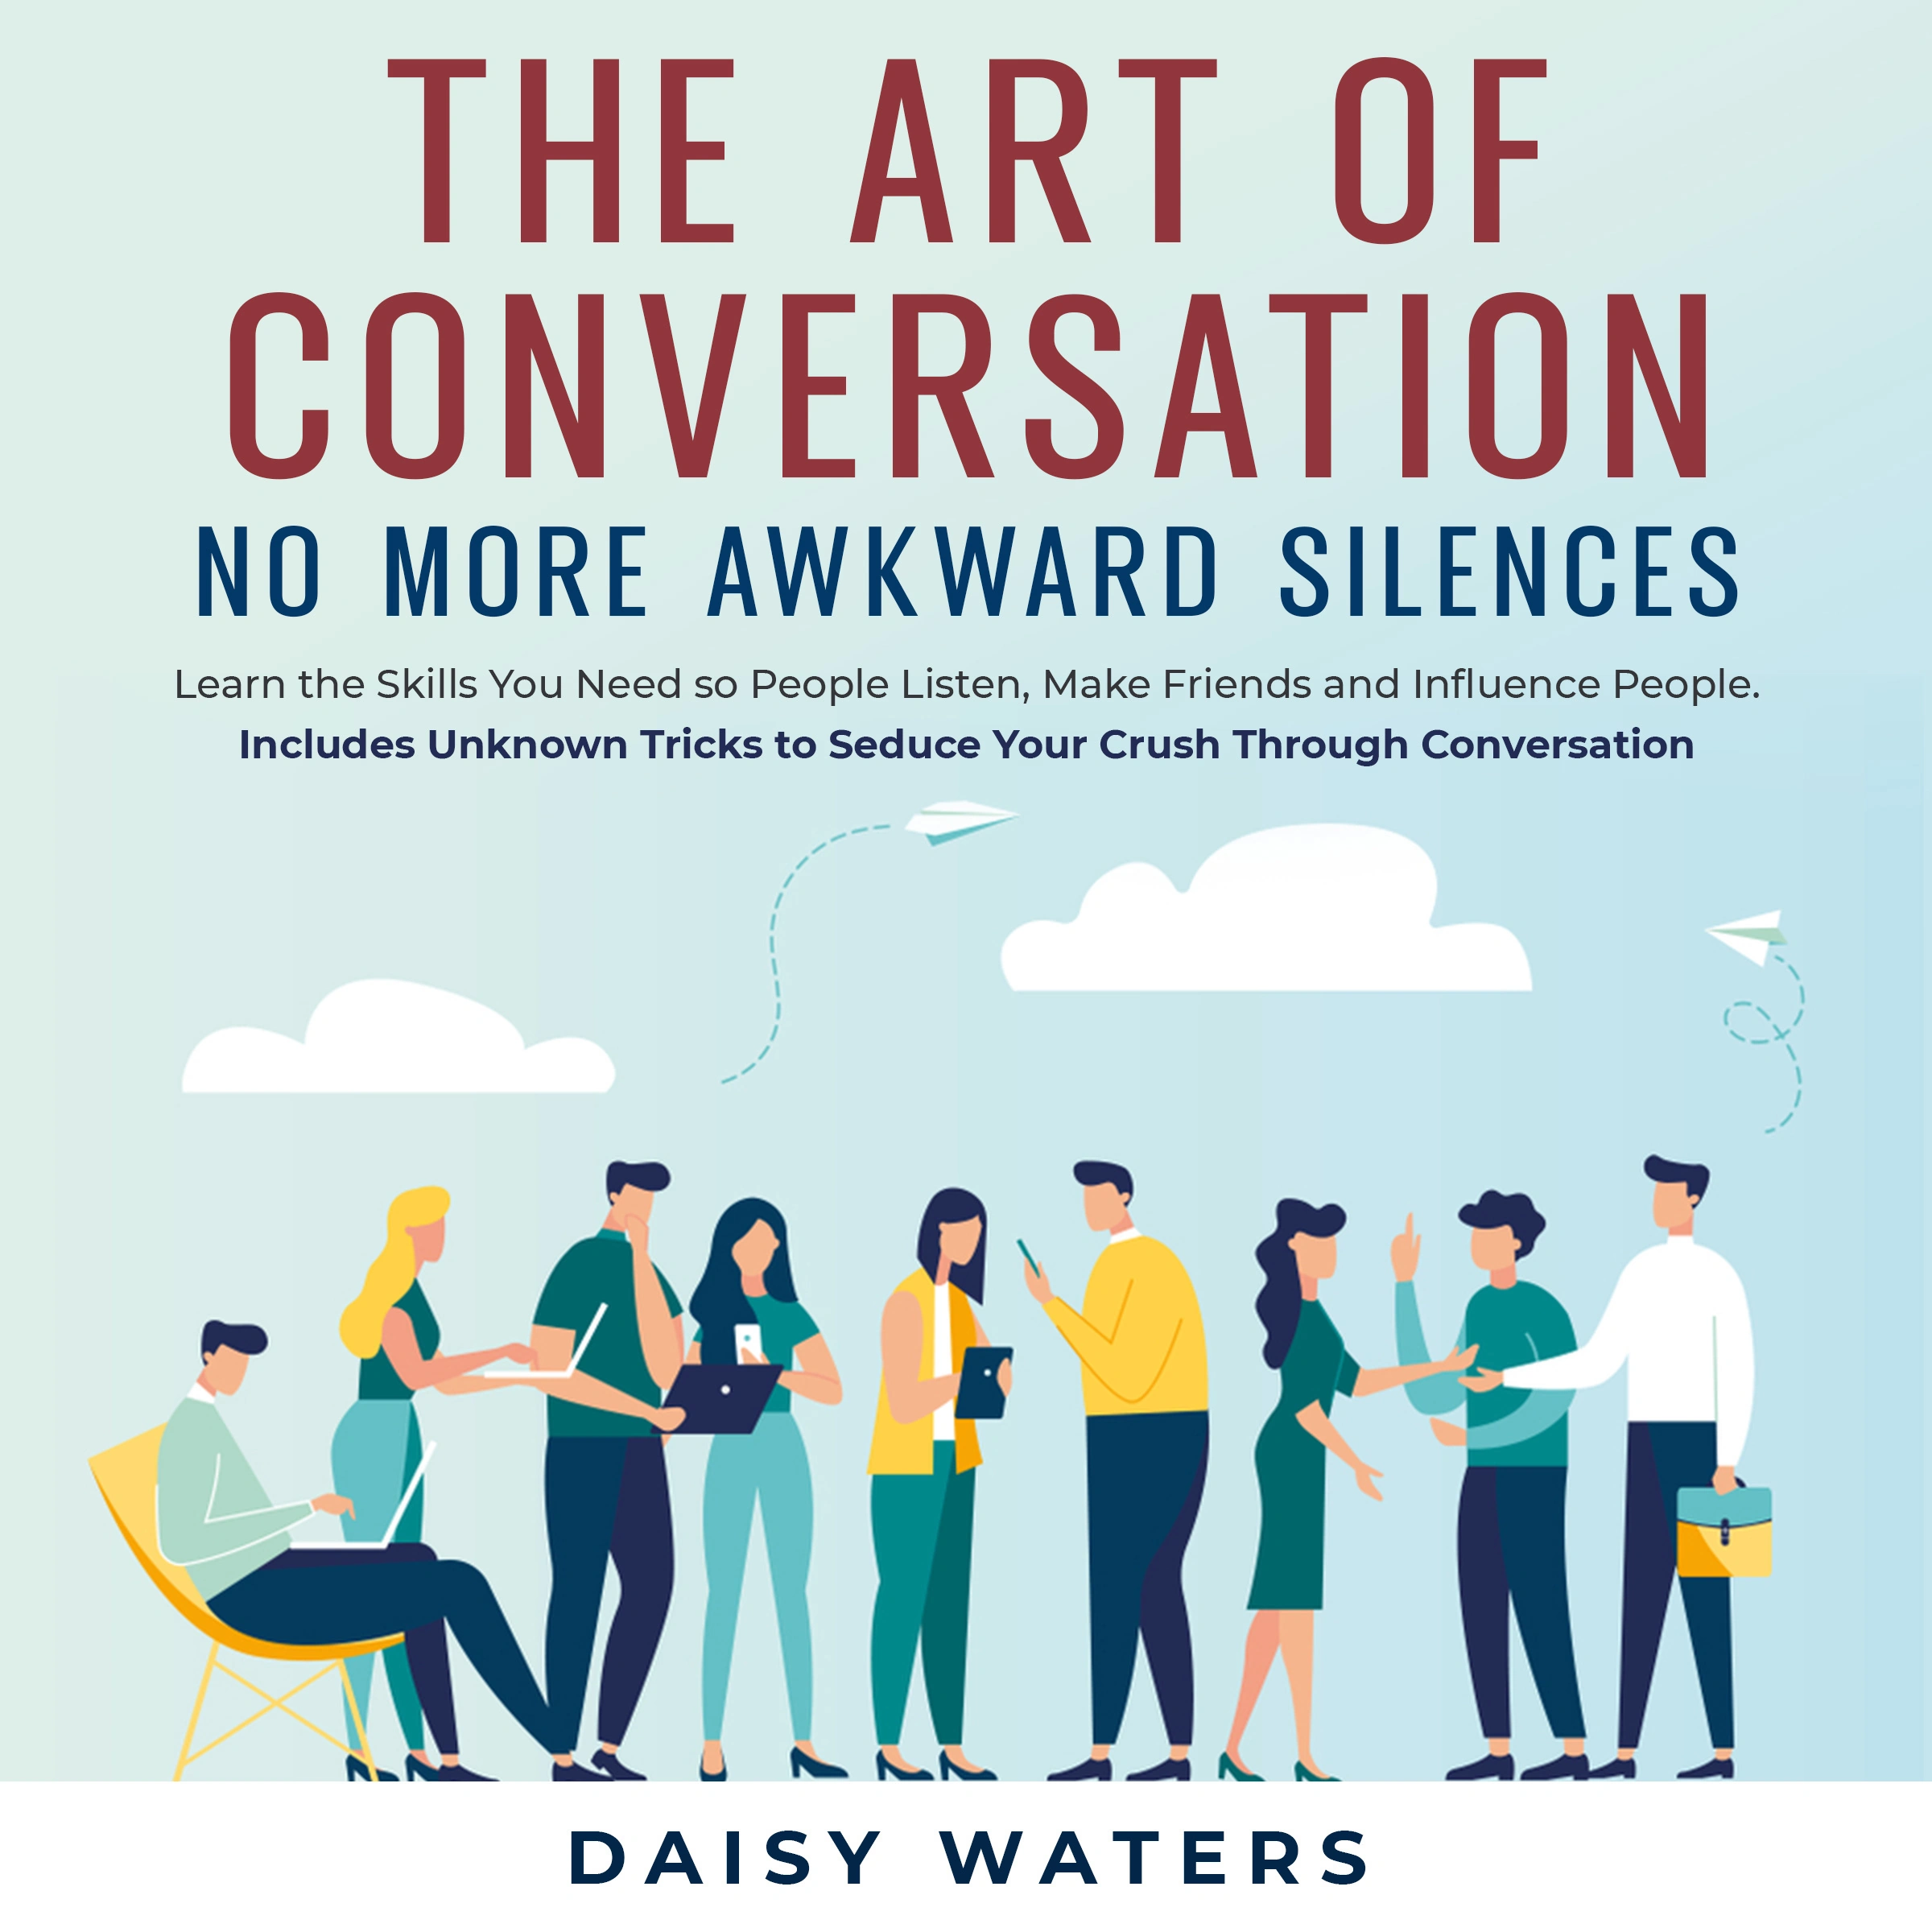 The Art of Conversation: No More Awkward Silences Audiobook by Daisy Waters